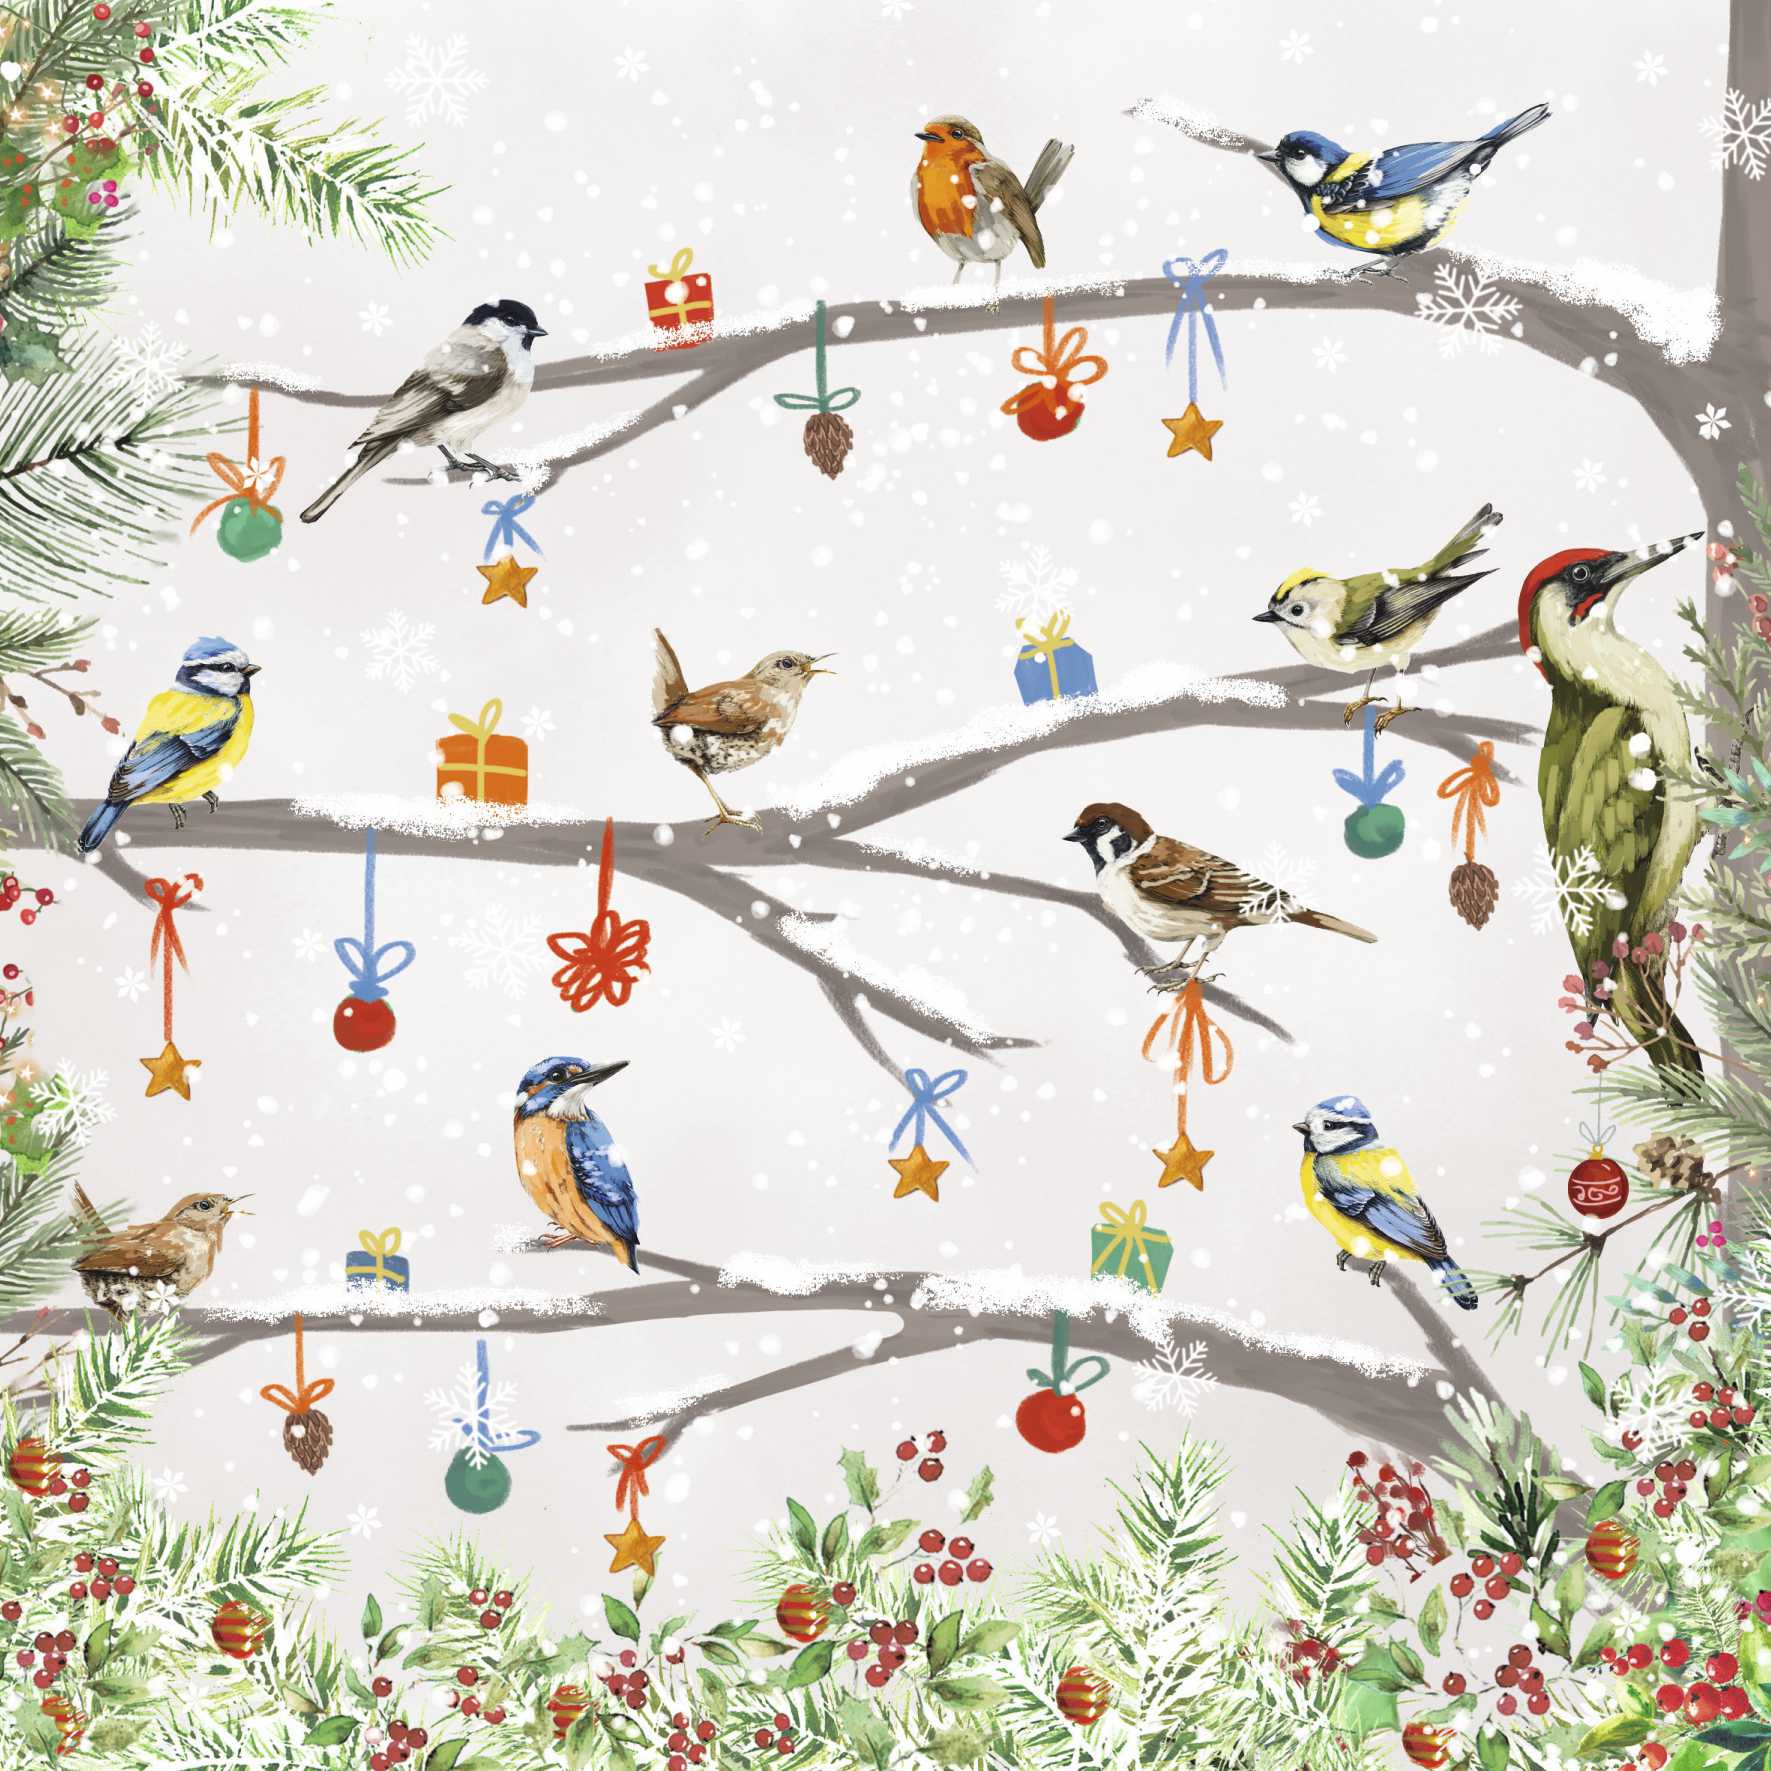 Illustration. A pale background with snow falling. Three snow covered branches fill the scene with birds, baubles and small presents on. Leaves and berries appear around three of the edges.